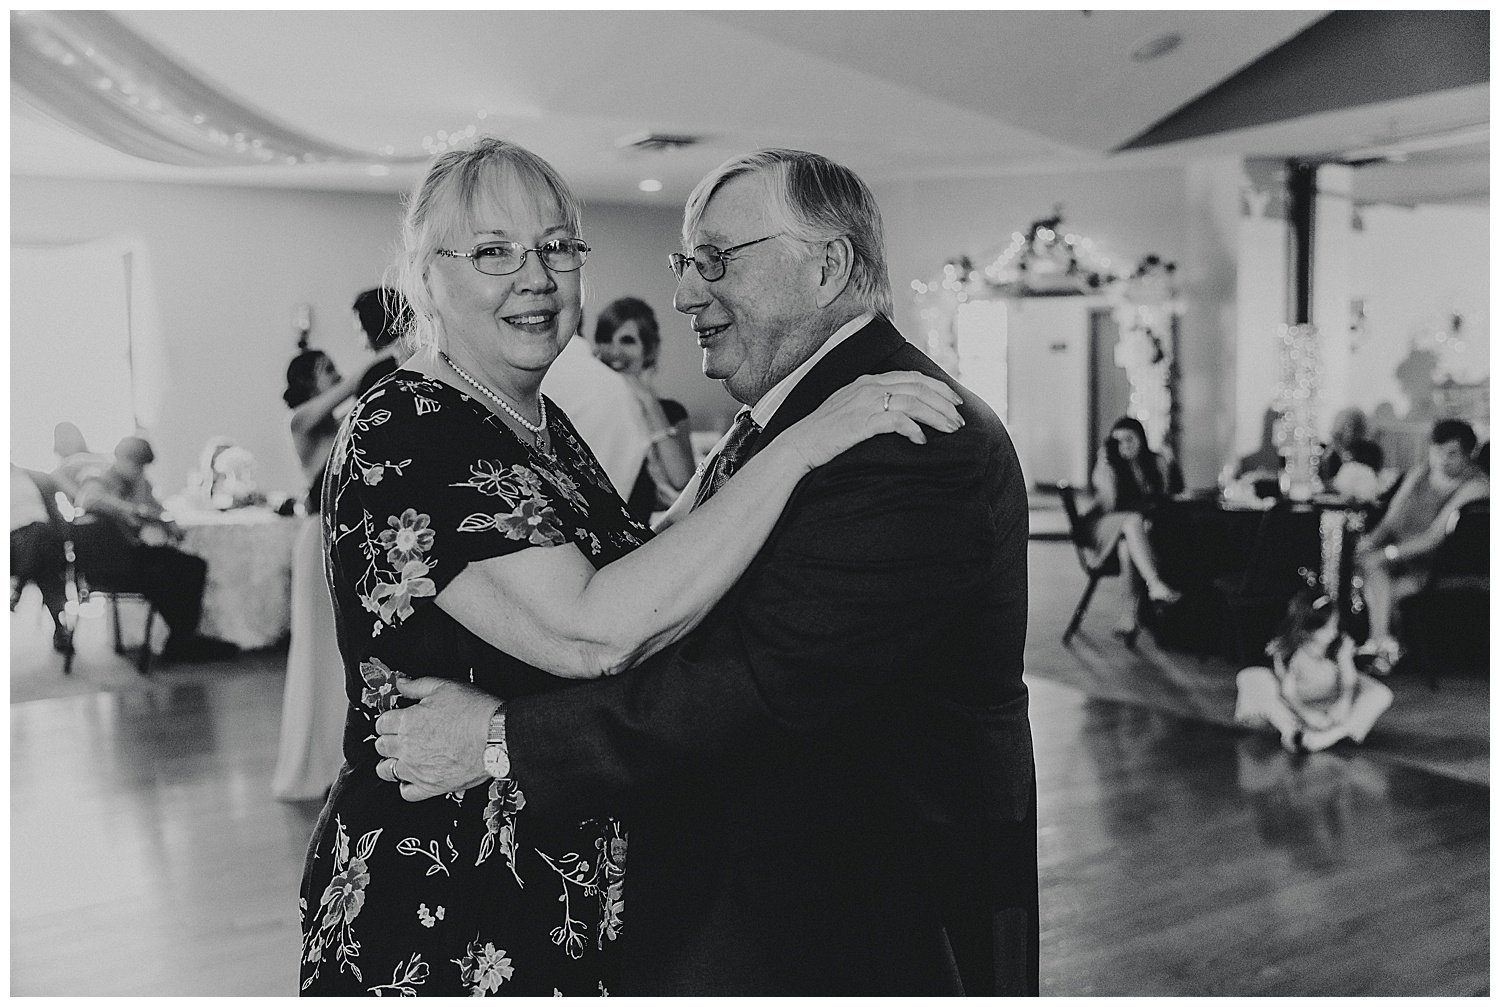  Brennan’s grandparents celebrated their 50th anniversary the day before her wedding! She was so kind to dedicate a dance to them on her big day and it was clear to see how much it meant to them. 